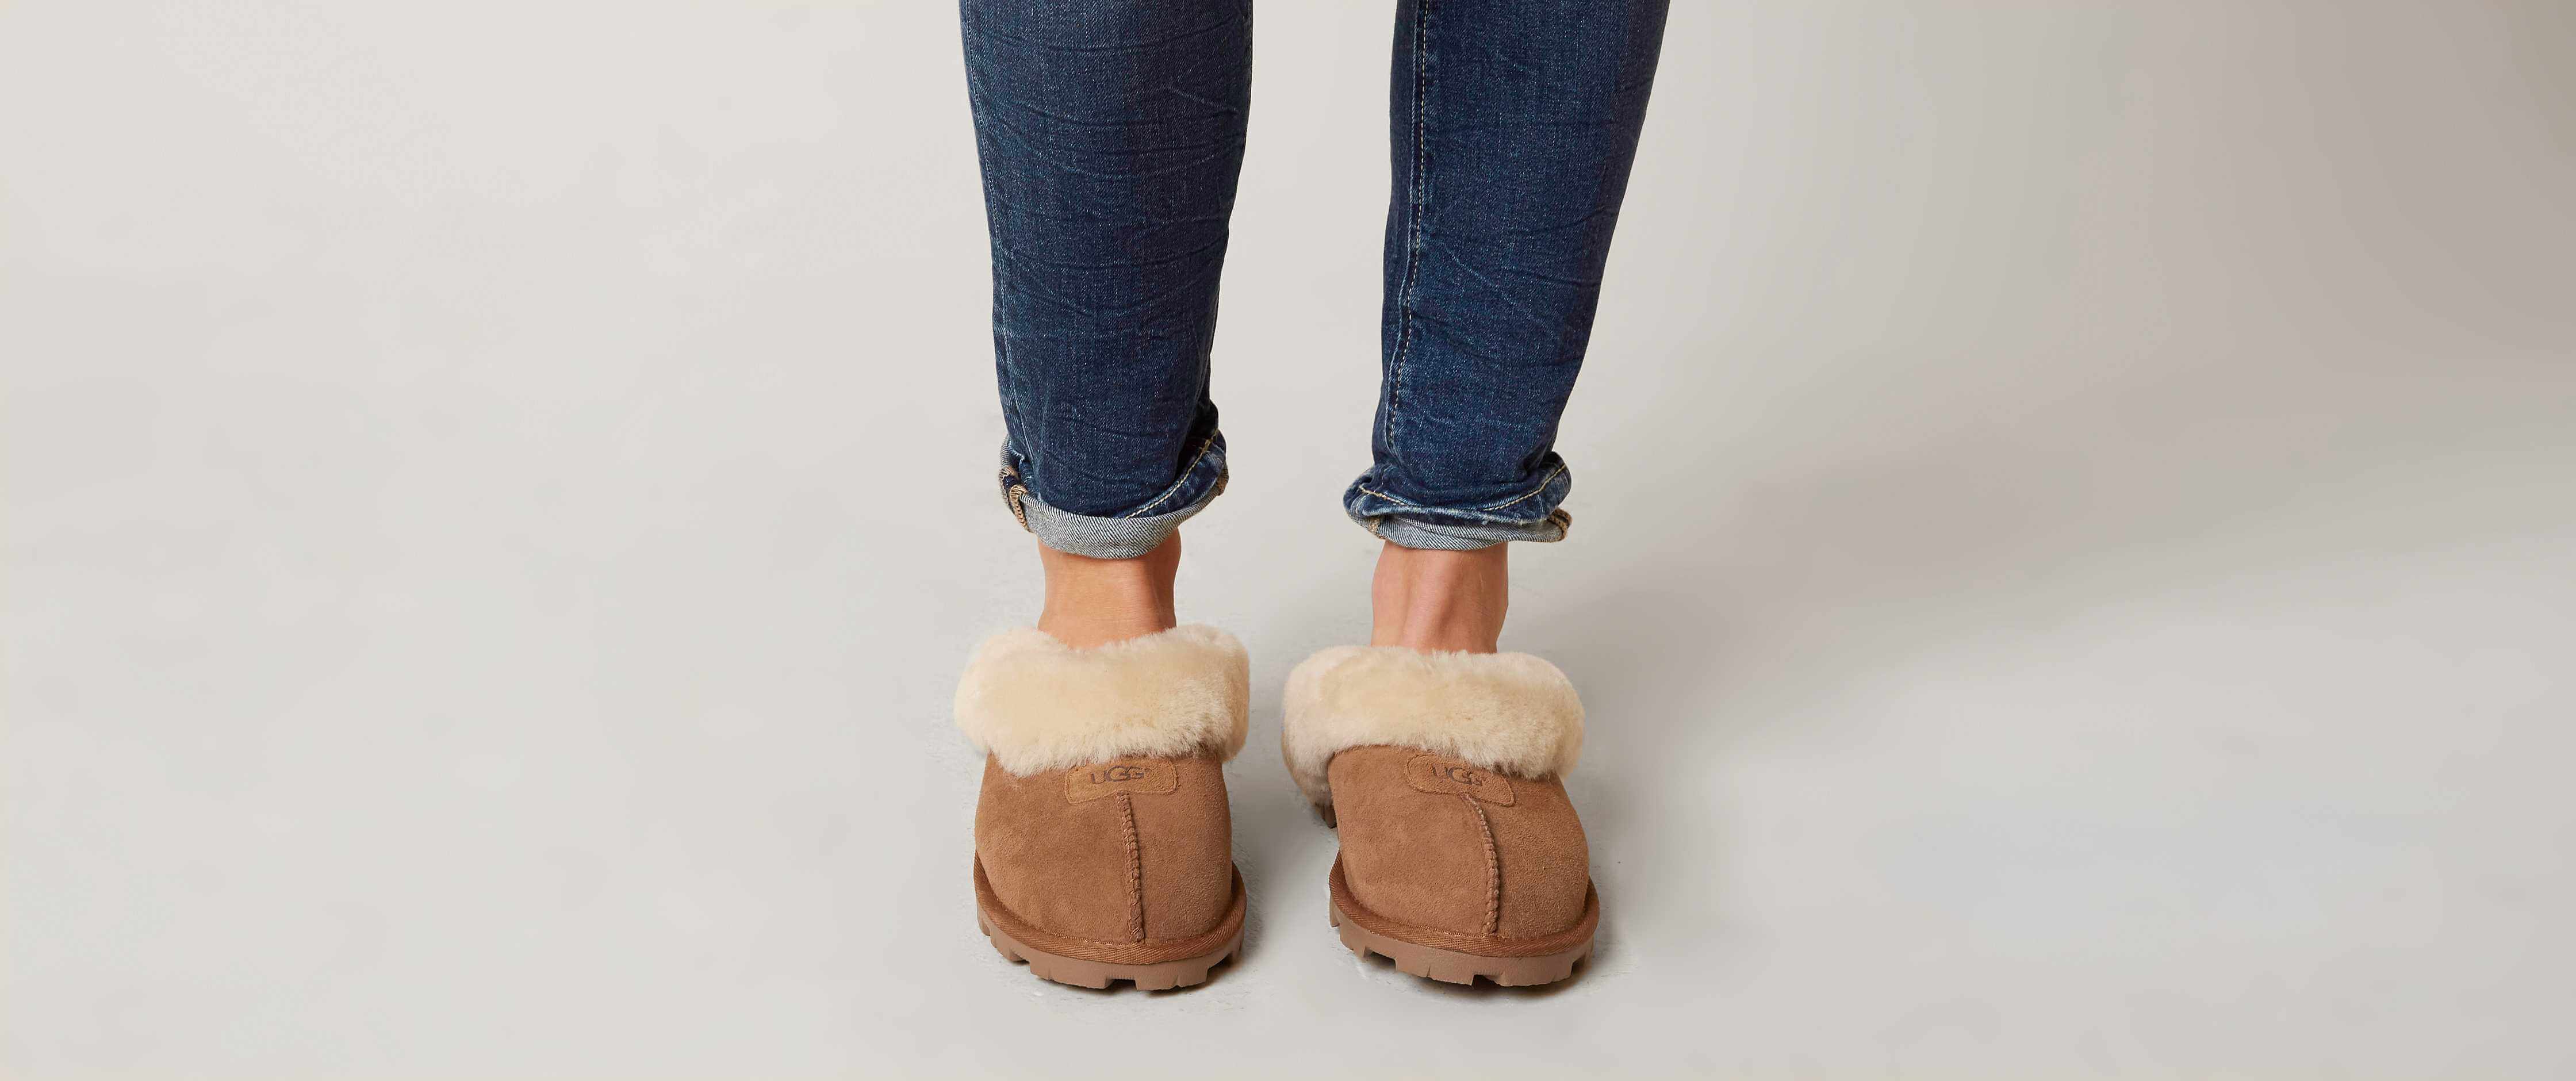 ugg slippers women coquette